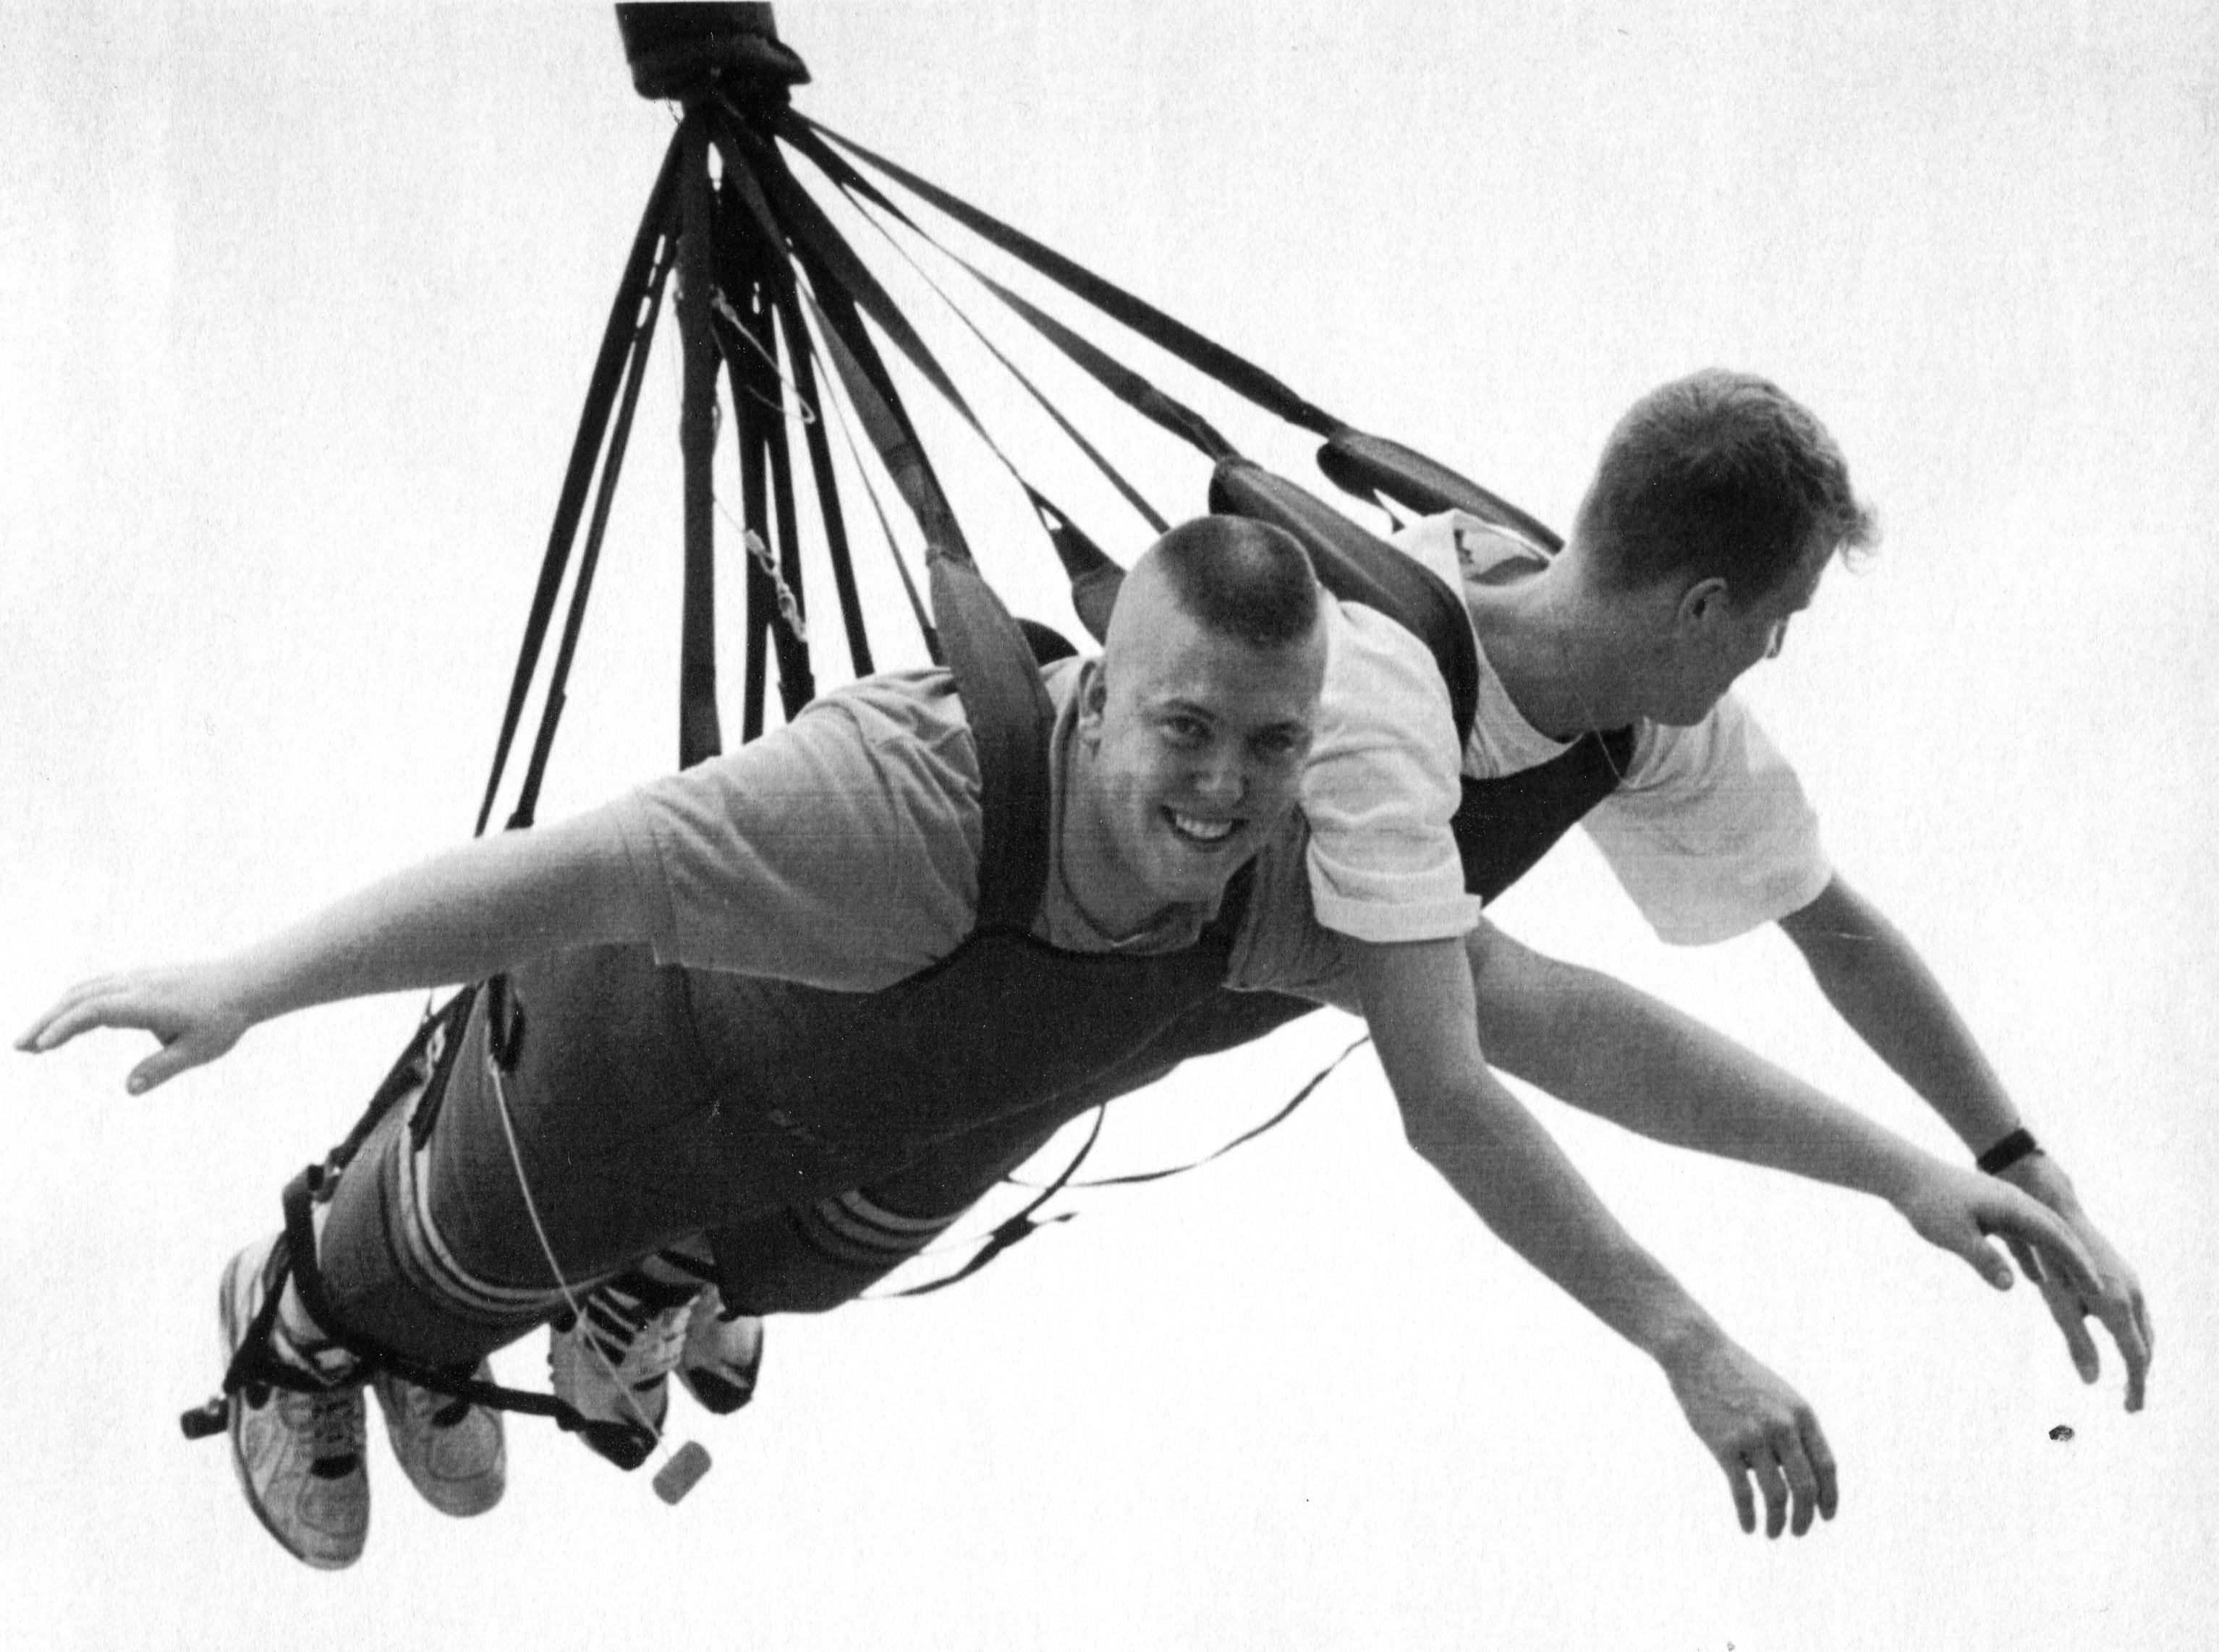 June 26, 1995 - Agawam - Chris Allard, left, and Jeff Laing, both of Chicopee, ride the new Skycoaster at Riverside Park. (Republican file photo) Staff-Shot